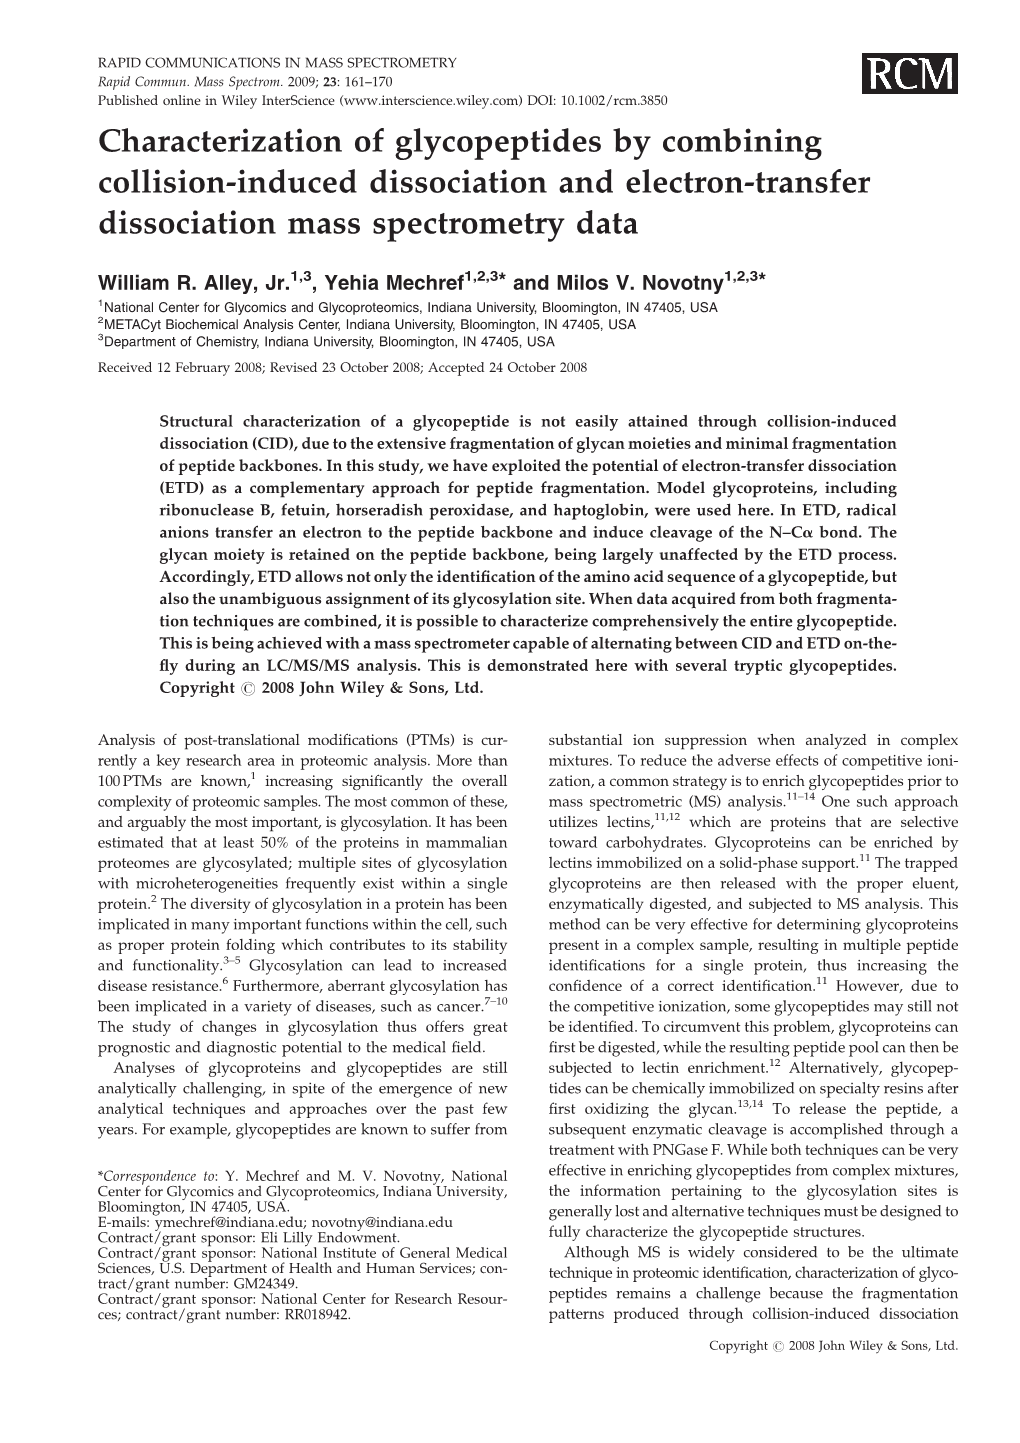 Characterization of Glycopeptides by Combining Collision-Induced Dissociation and Electron-Transfer Dissociation Mass Spectrometry Data